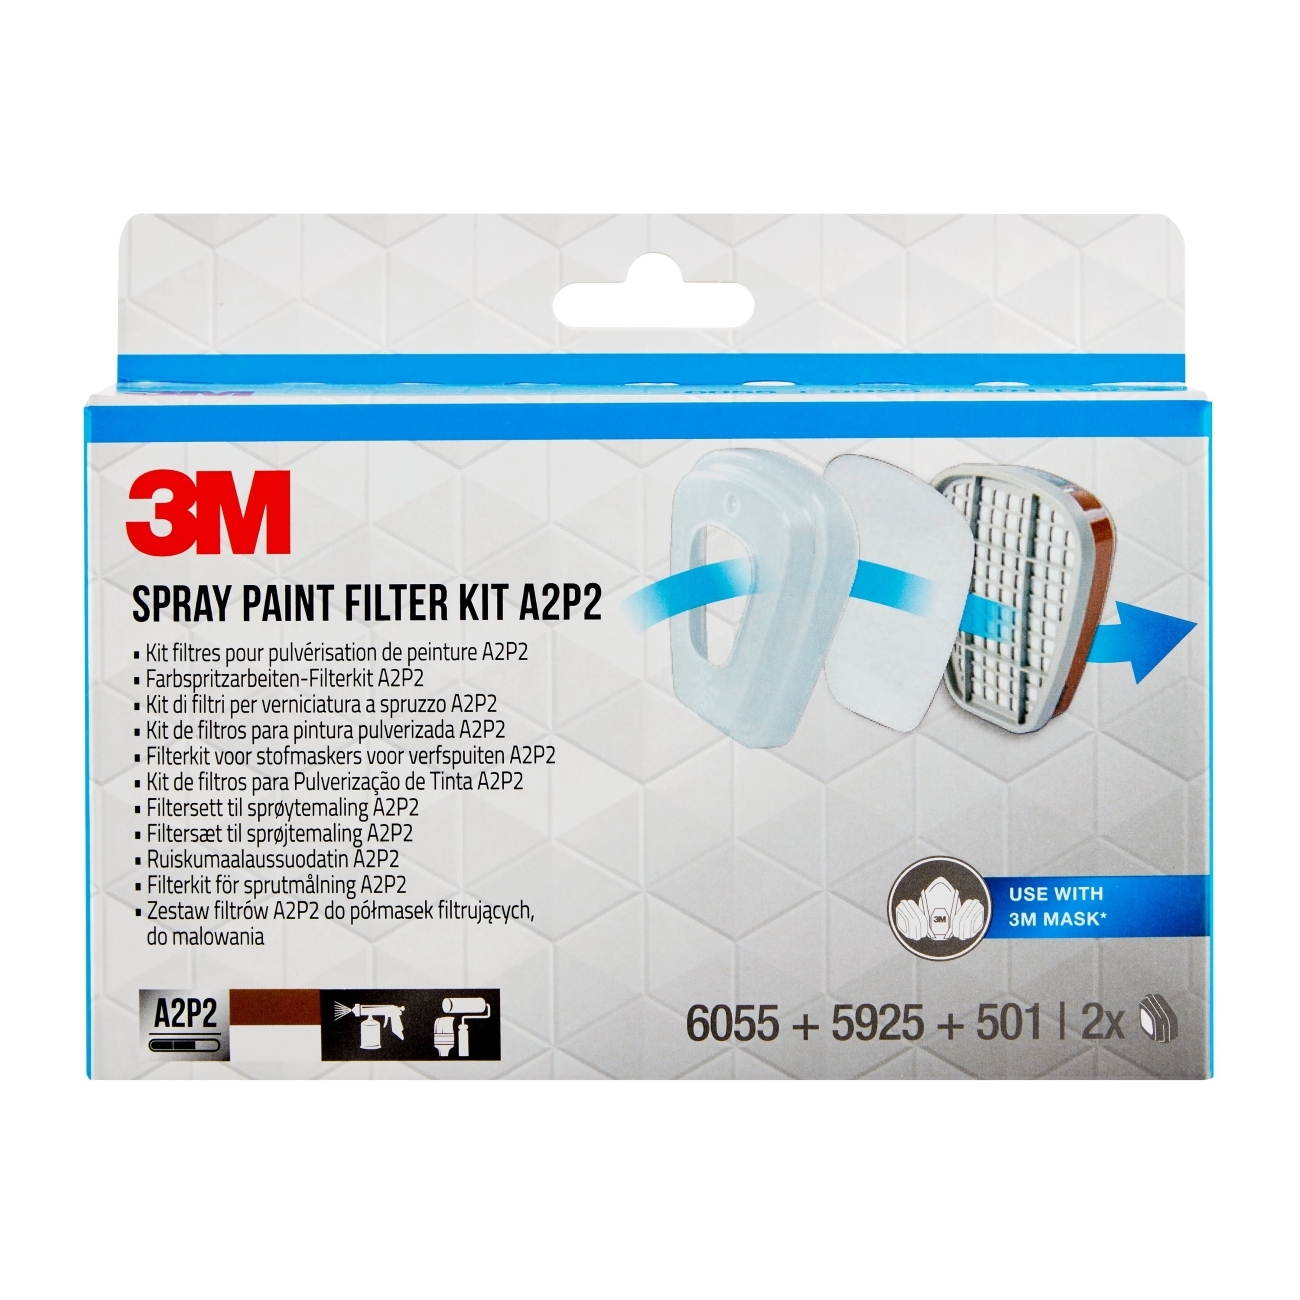 3M Filter kit for paint spraying work, 6002PRO1 set, 2x 6055 A2 filter, 2x 5925 P2R particle filter, 2x 501 filter cover